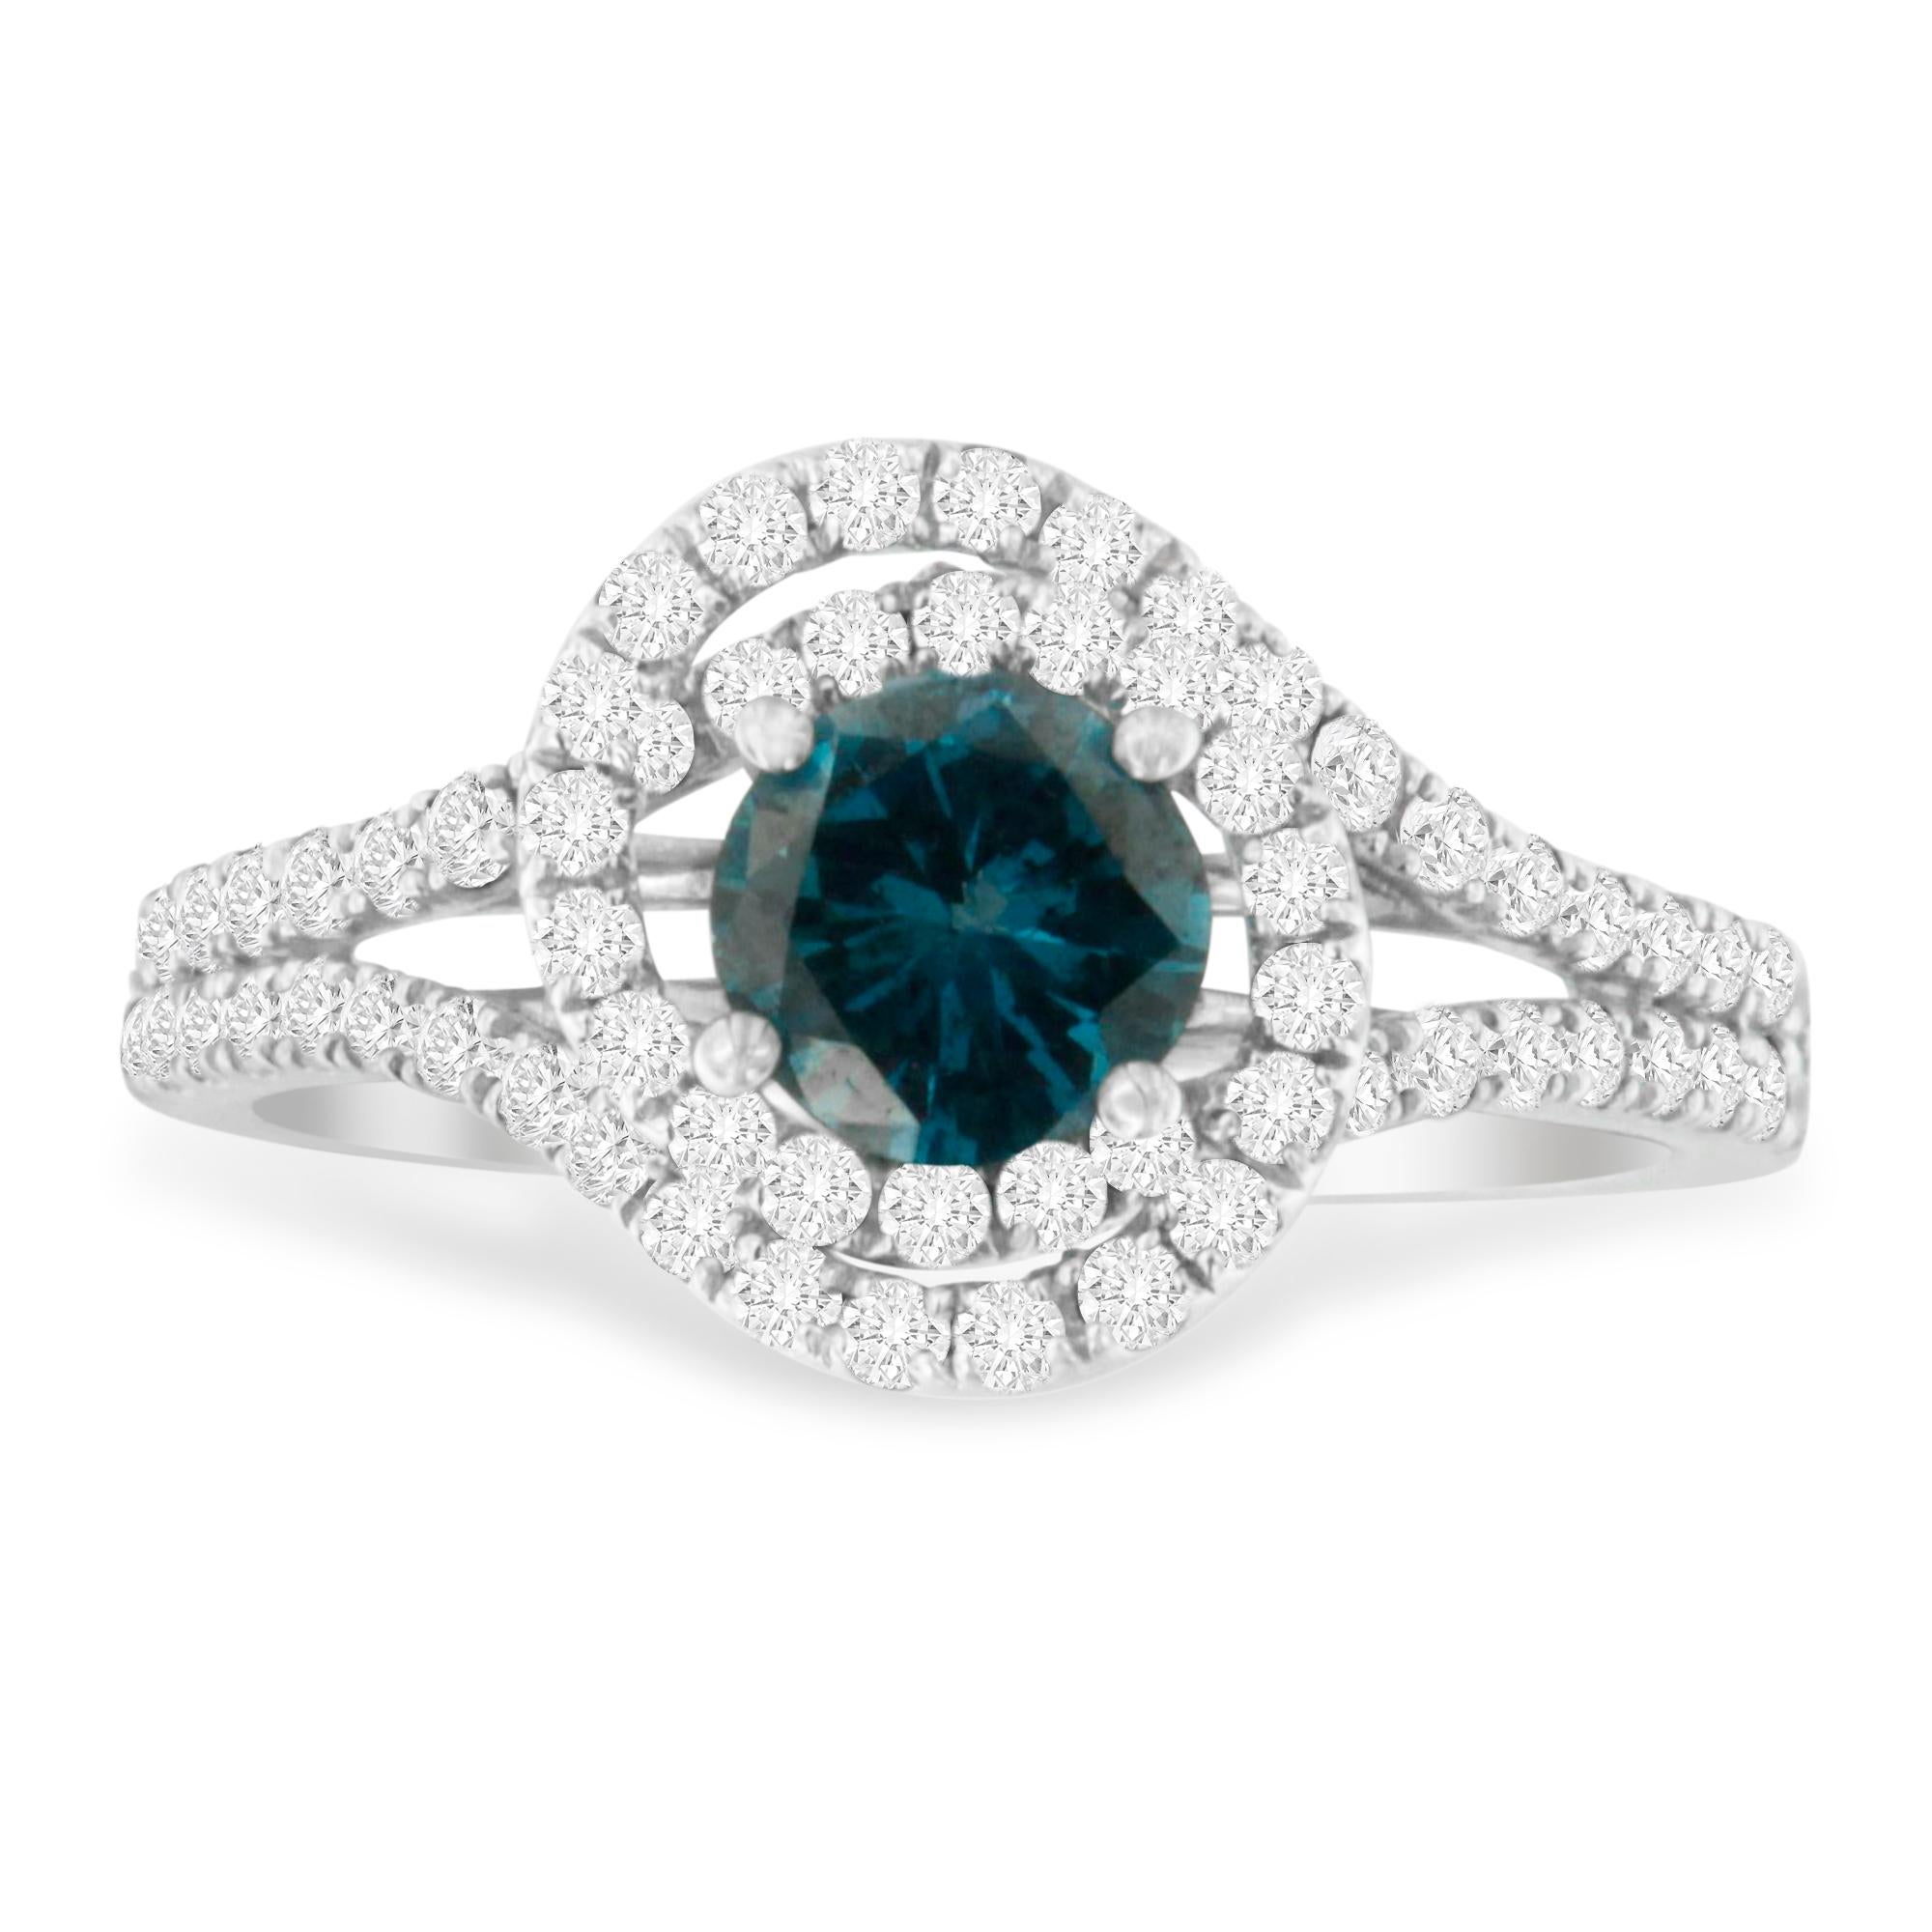 For Sale:  14K White Gold 1 1/3 Carat White & Blue Diamond Halo Cocktail Statement Ring 2